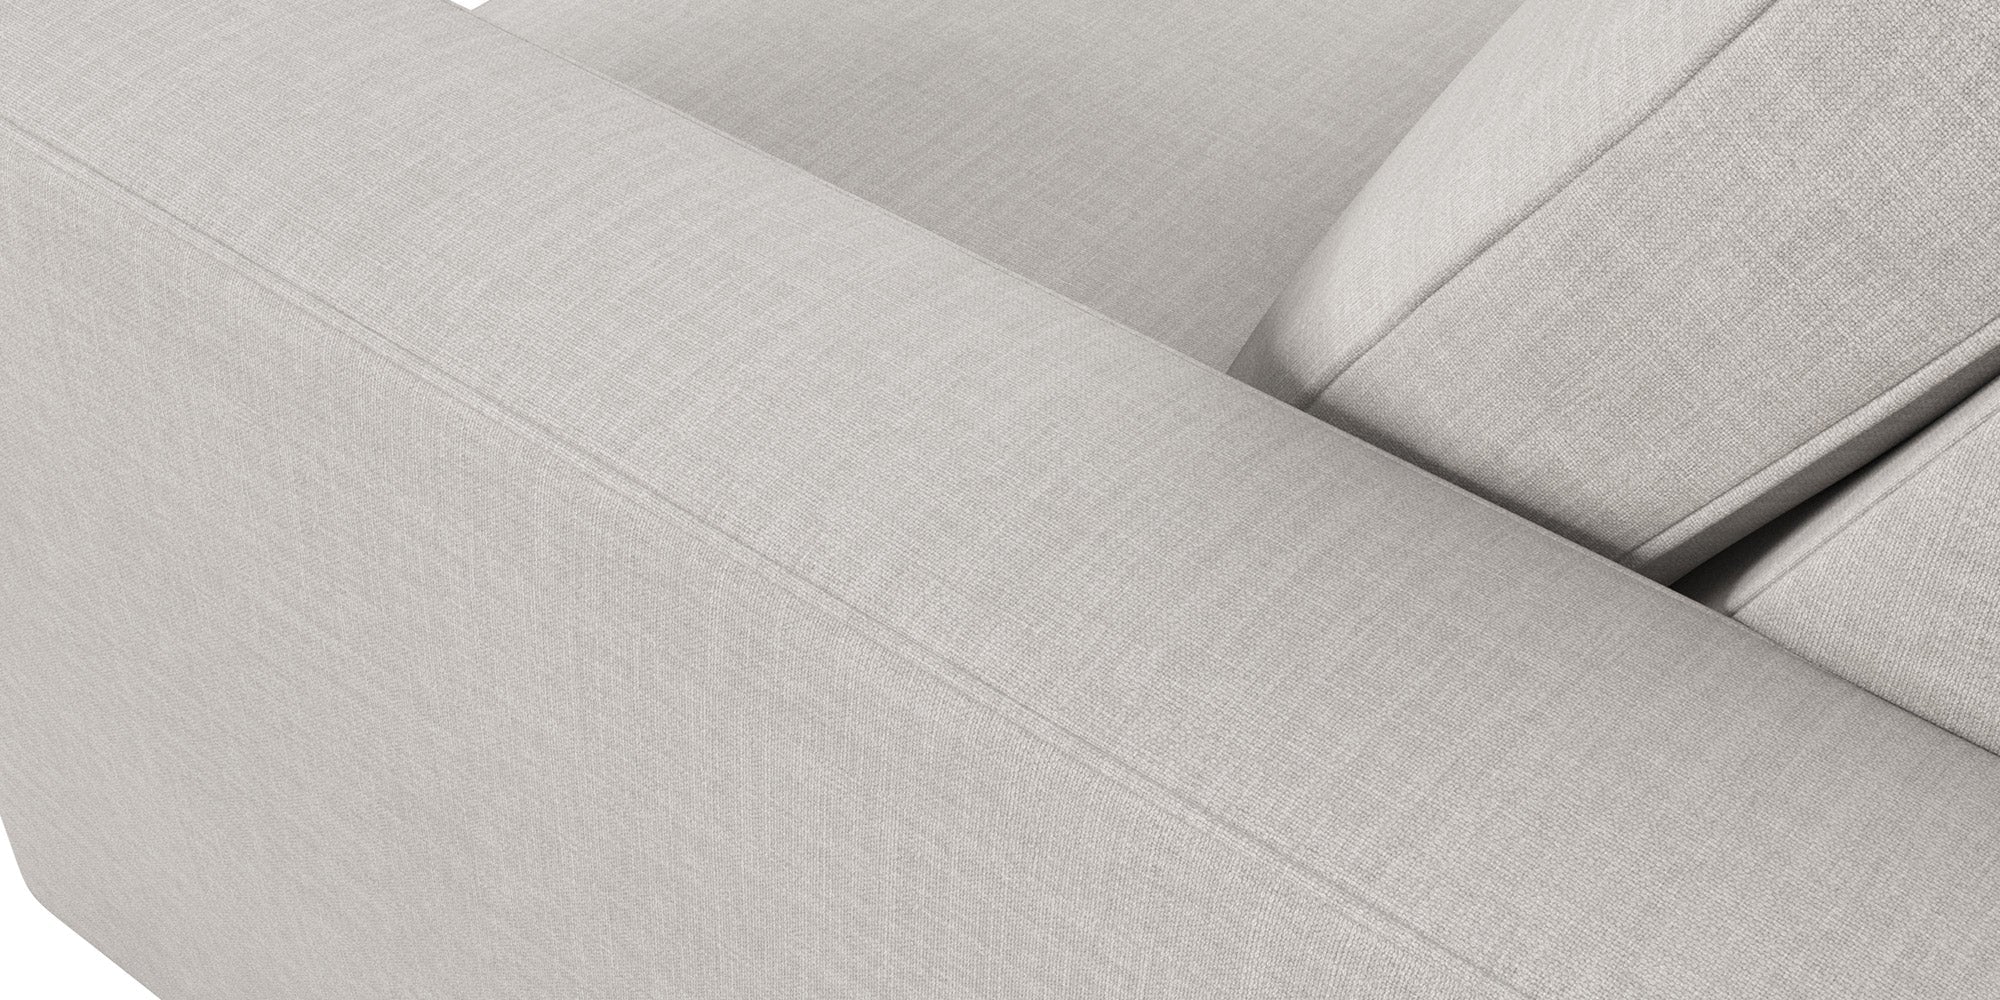 G: Rio Sofa, shown here in Texture Haze fabric and Dave Cafe legs.